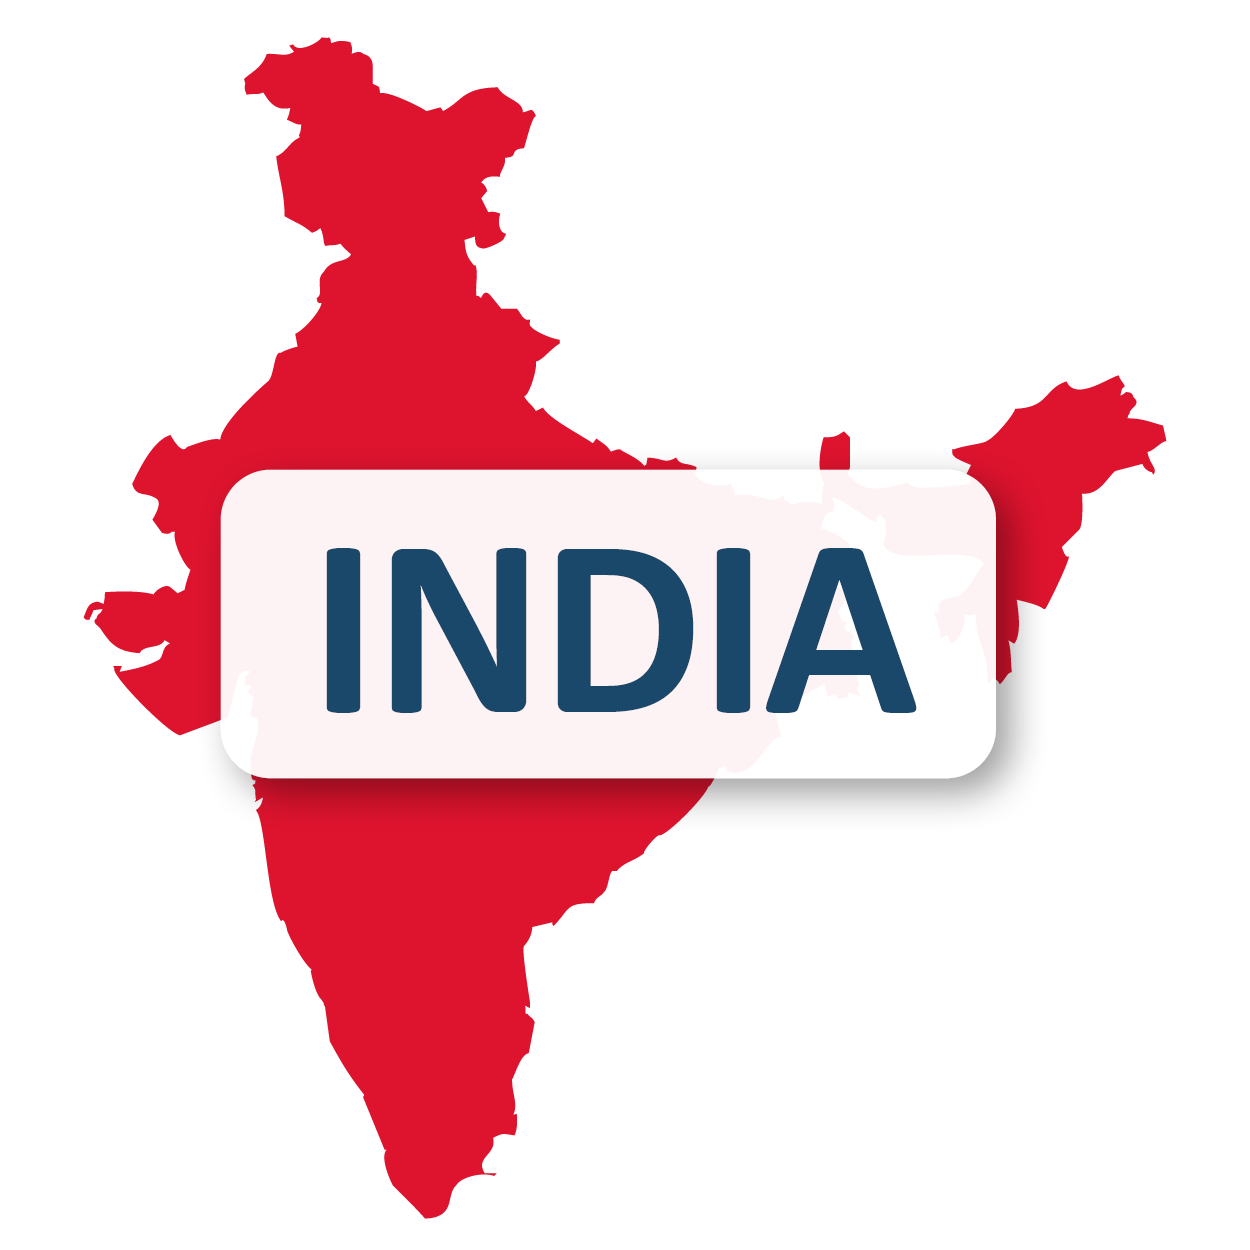 India map outline with text 'India'